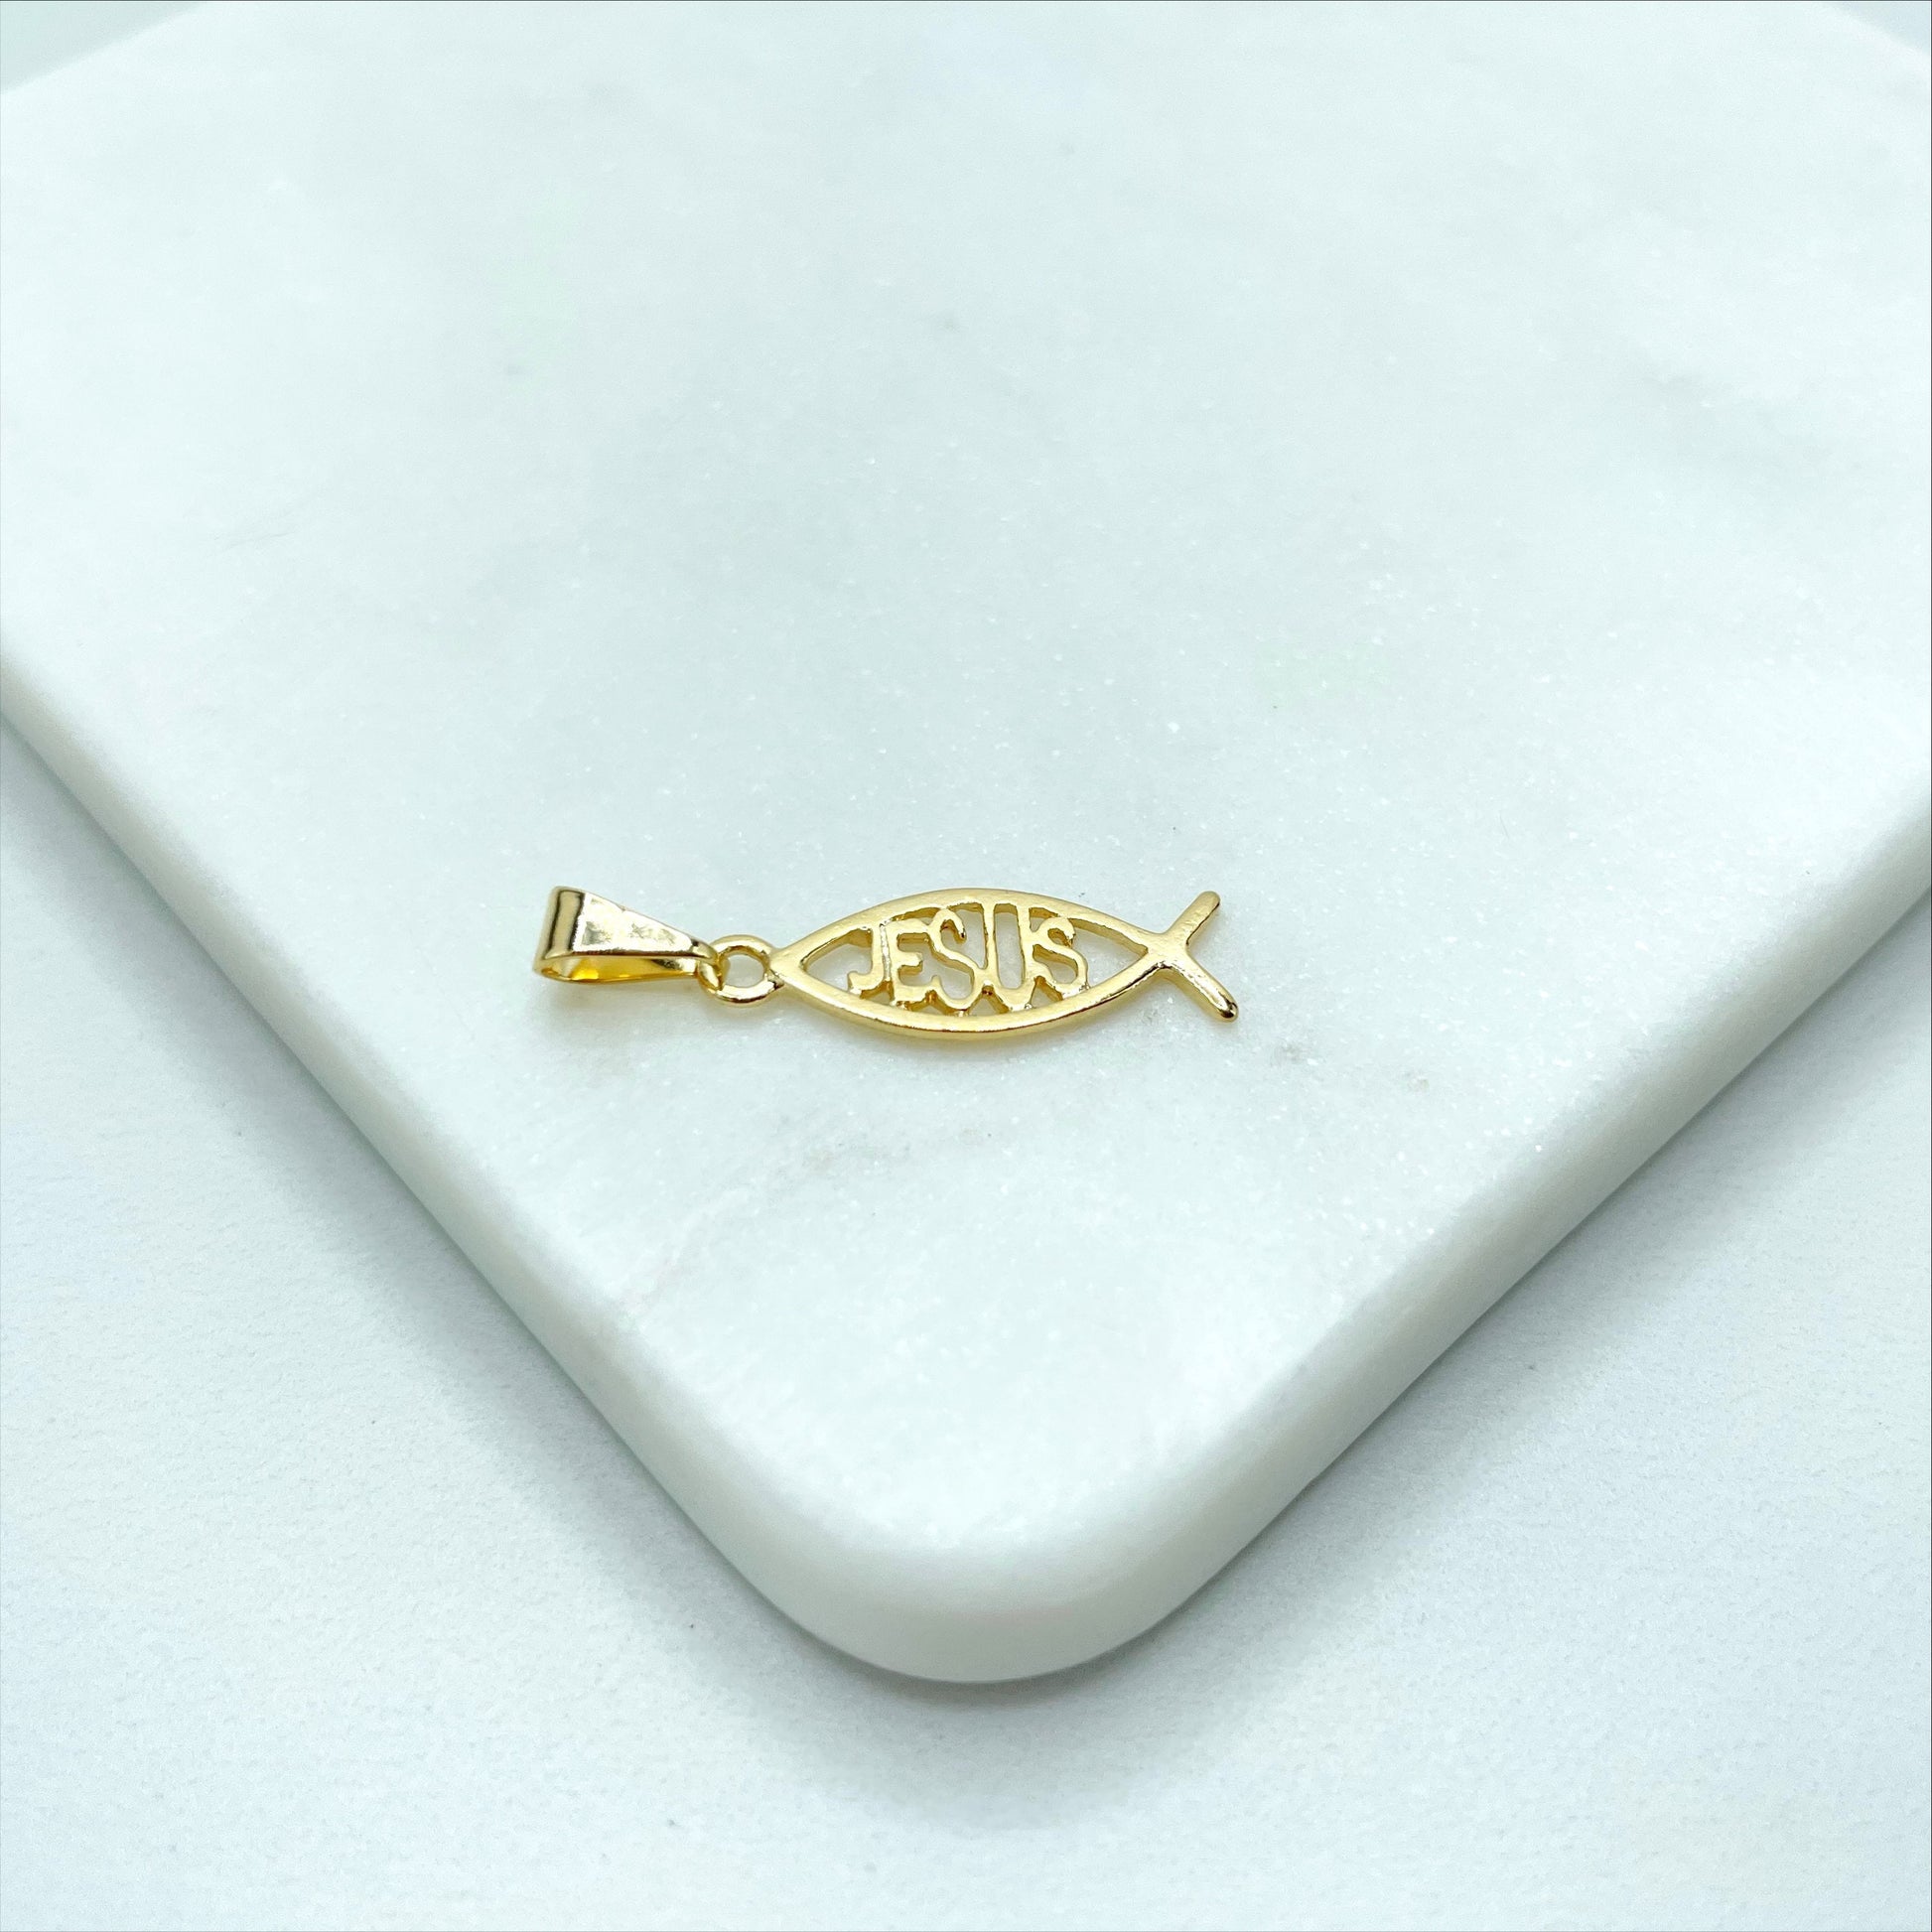 18k Gold Filled Fish Shape with "JESUS" Name Description inside Charm Pendant, Religious Jewelry, Wholesale Jewelry Making Supplies